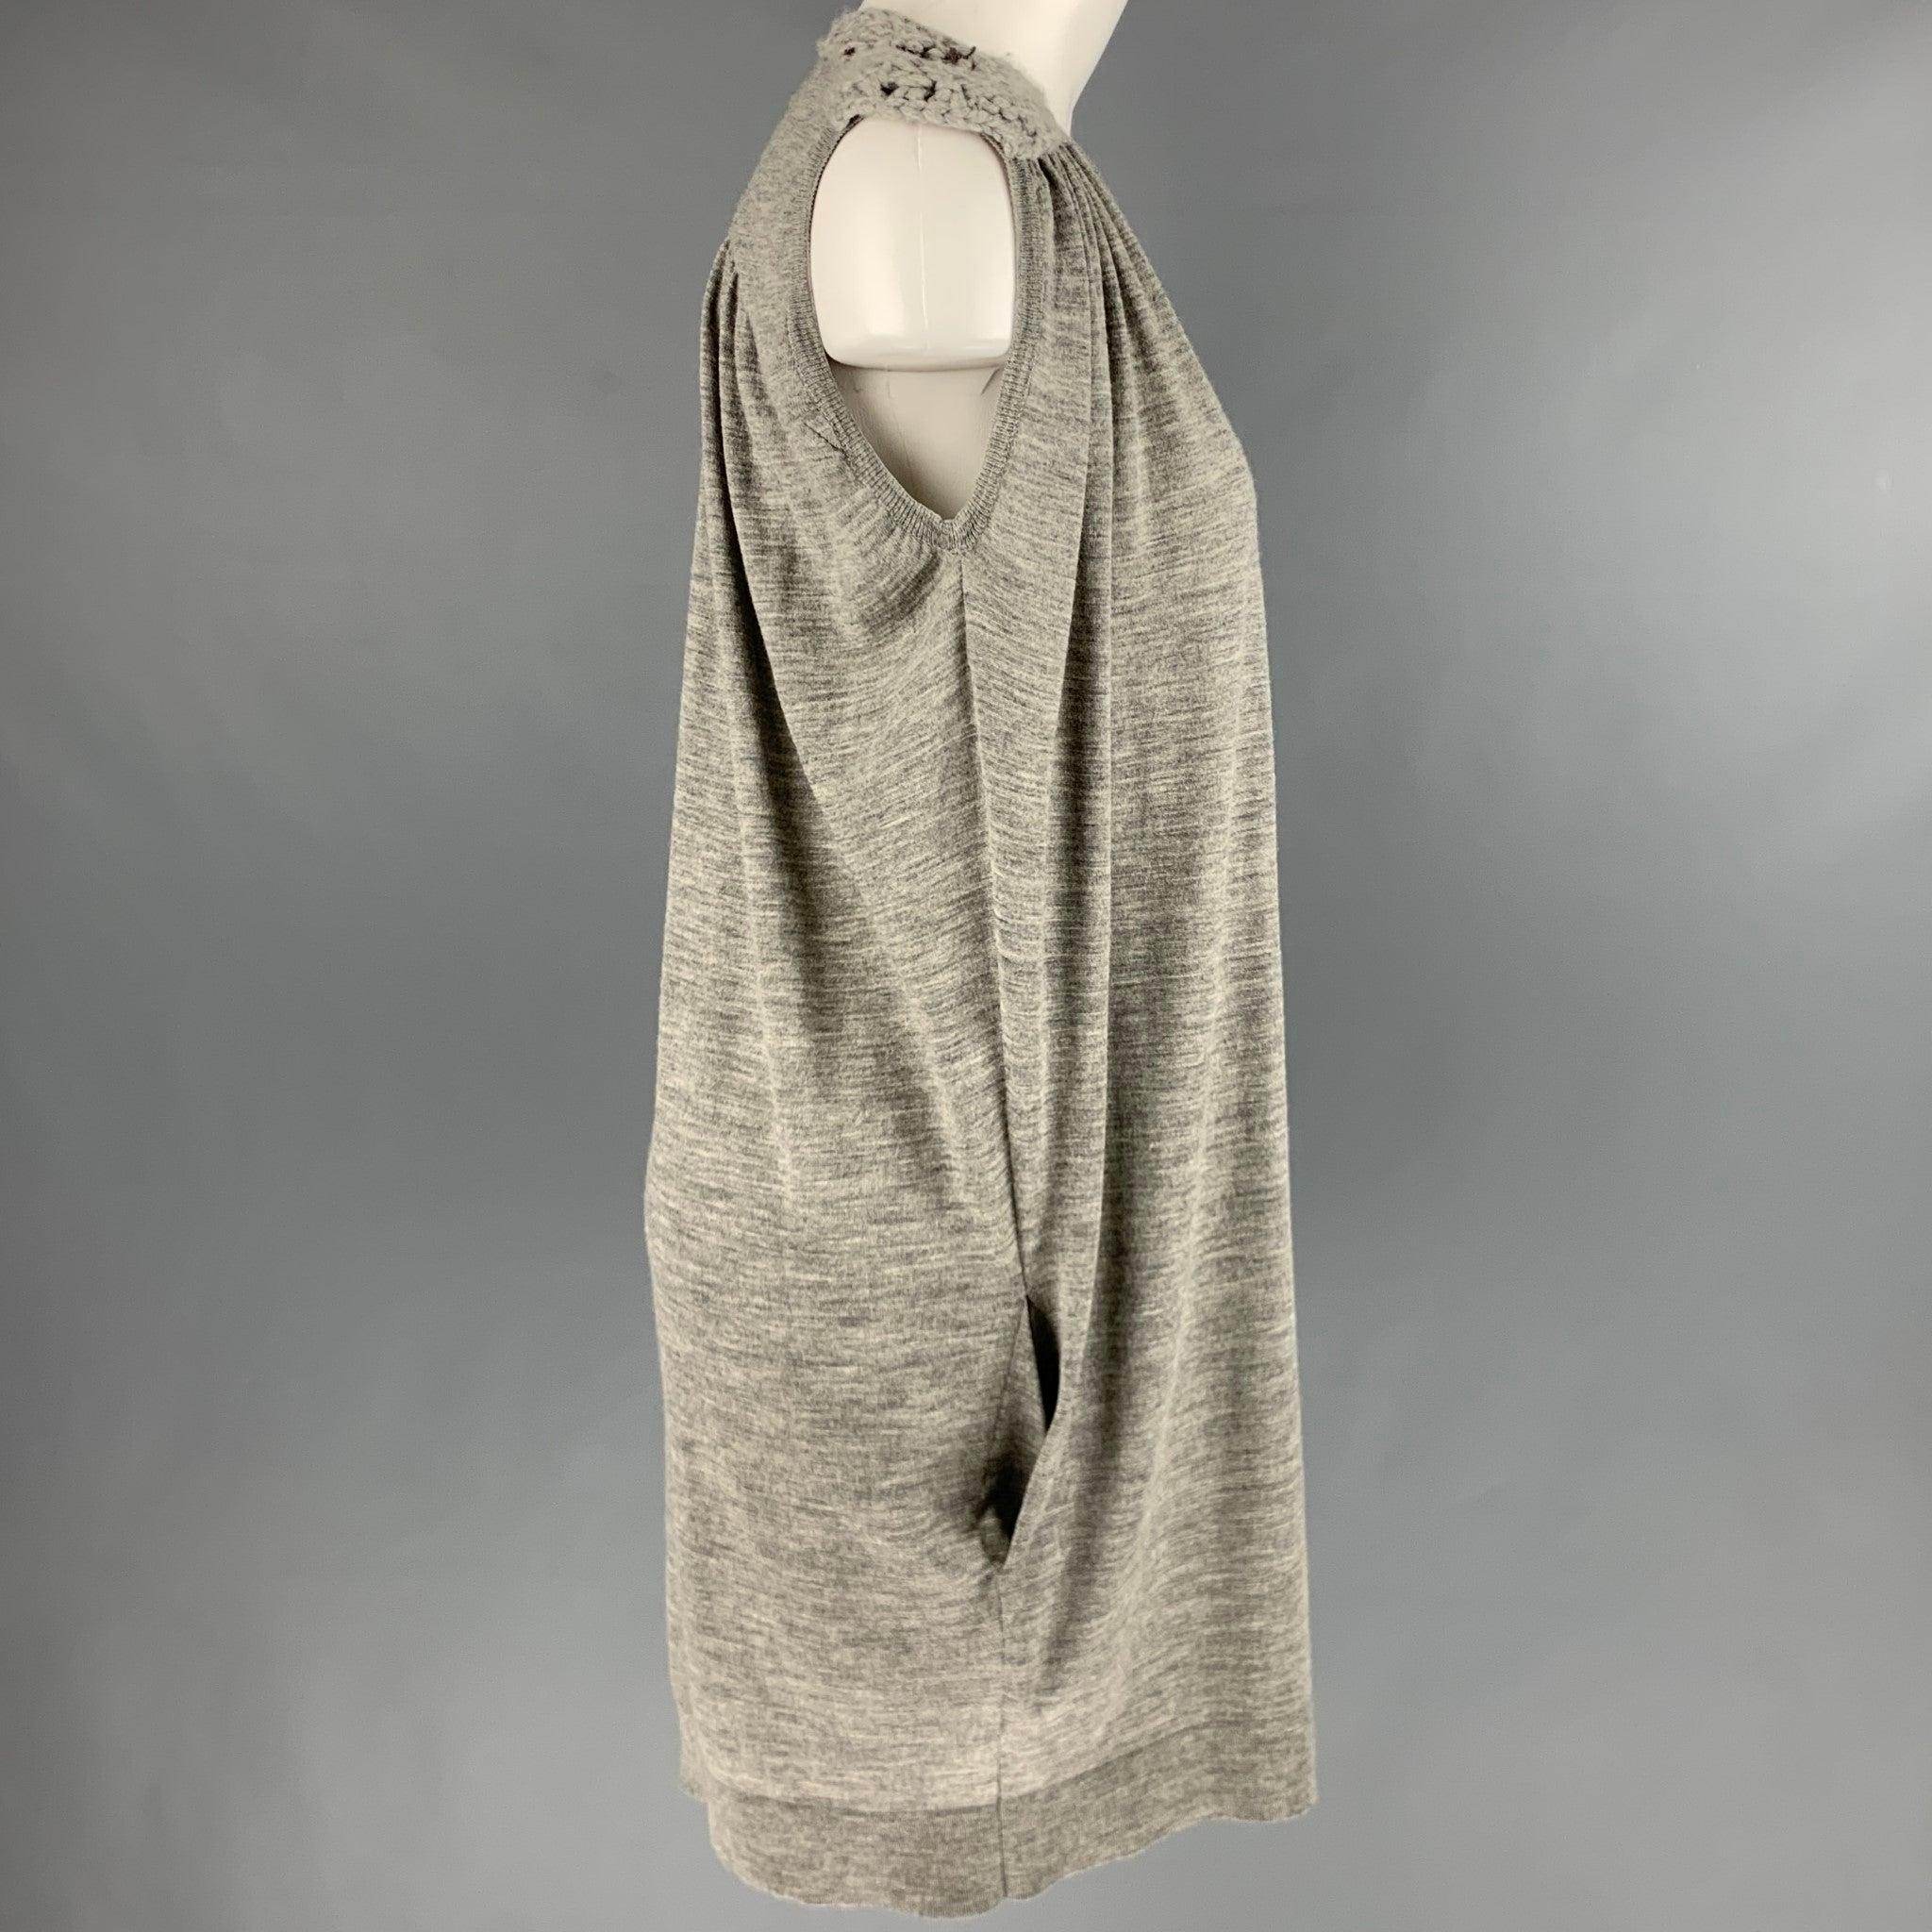 BALMAIN dress
in a grey wool jersey fabric featuring chain shoulder details, a relaxed fit, two pockets, and sleeveless style. Made in France.Very Good Pre-Owned Condition. 

Marked:  38 

Measurements: 
 
Shoulder: 16 inches Bust: 45 inches Hip: 48